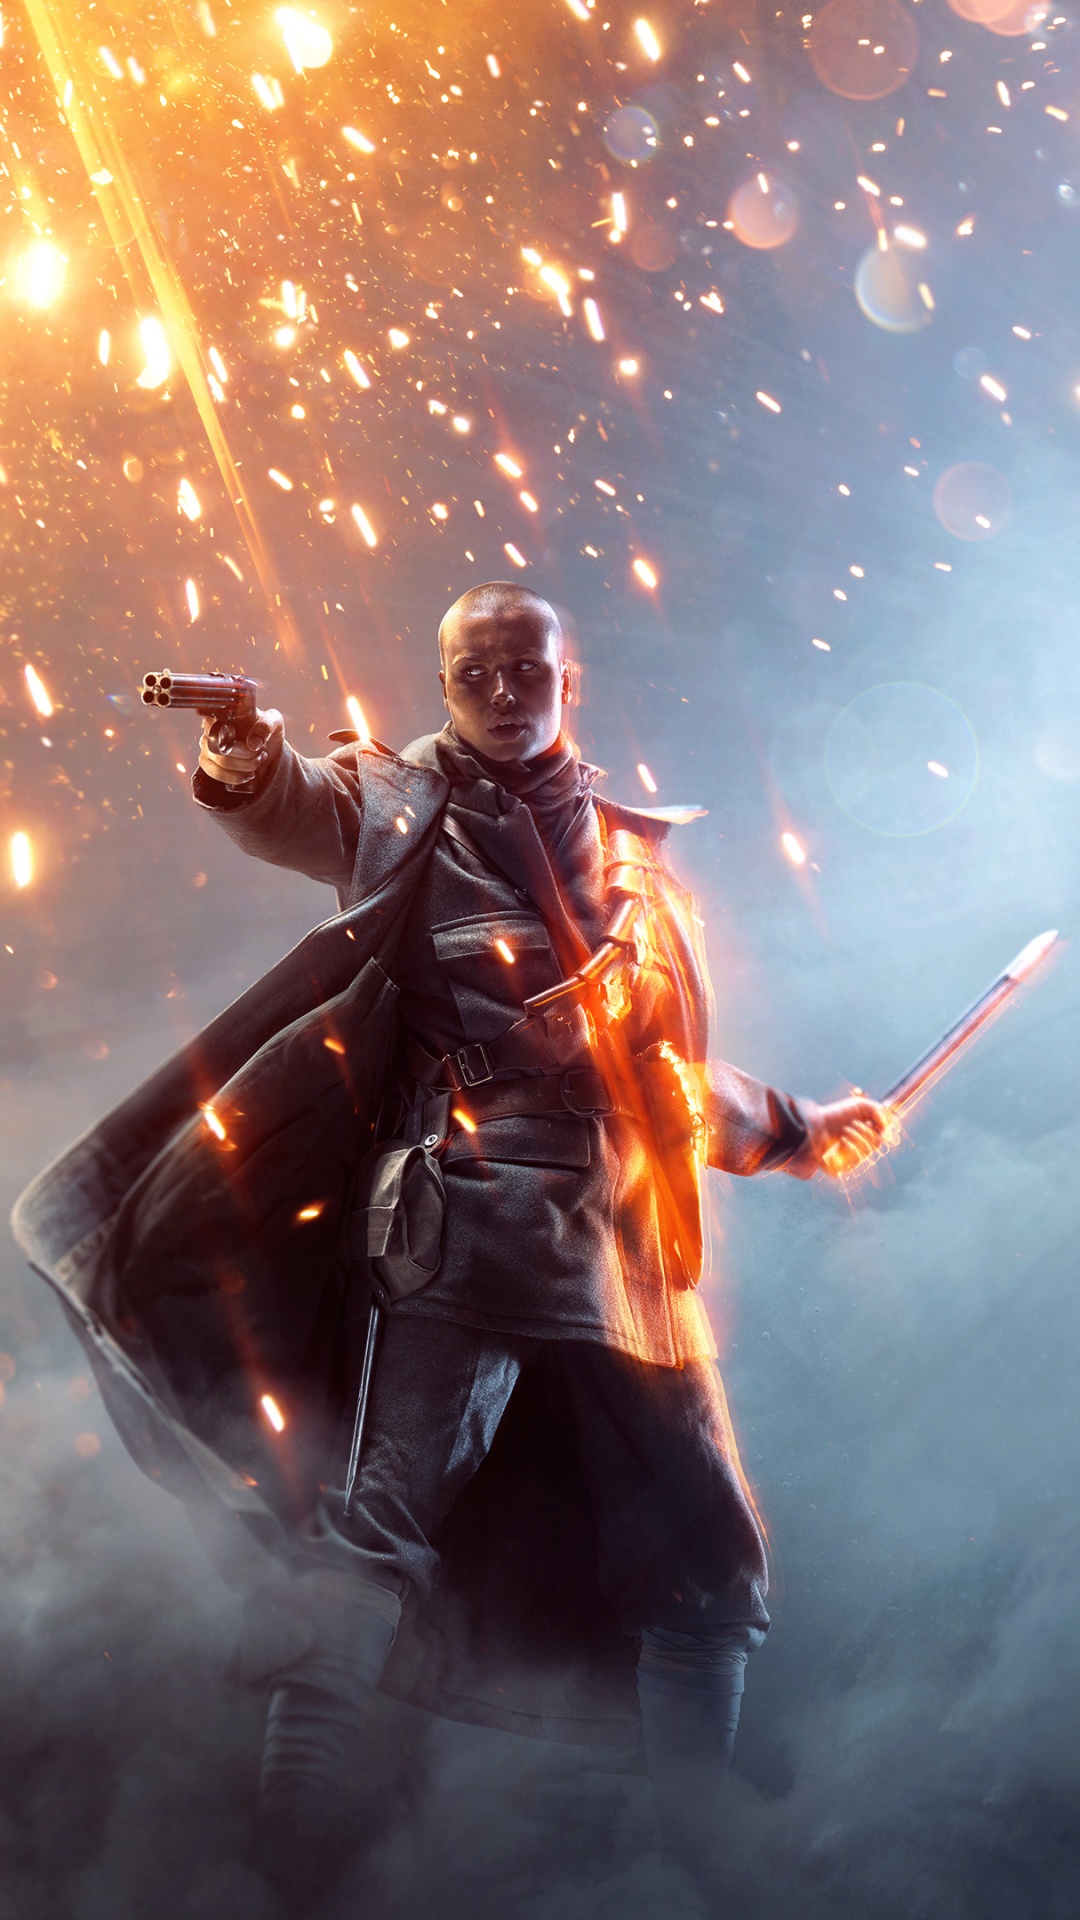 Battlefield 1, Electronic Arts, Space, Fictional Character, Darkness. Wallpaper in 1080x1920 Resolution